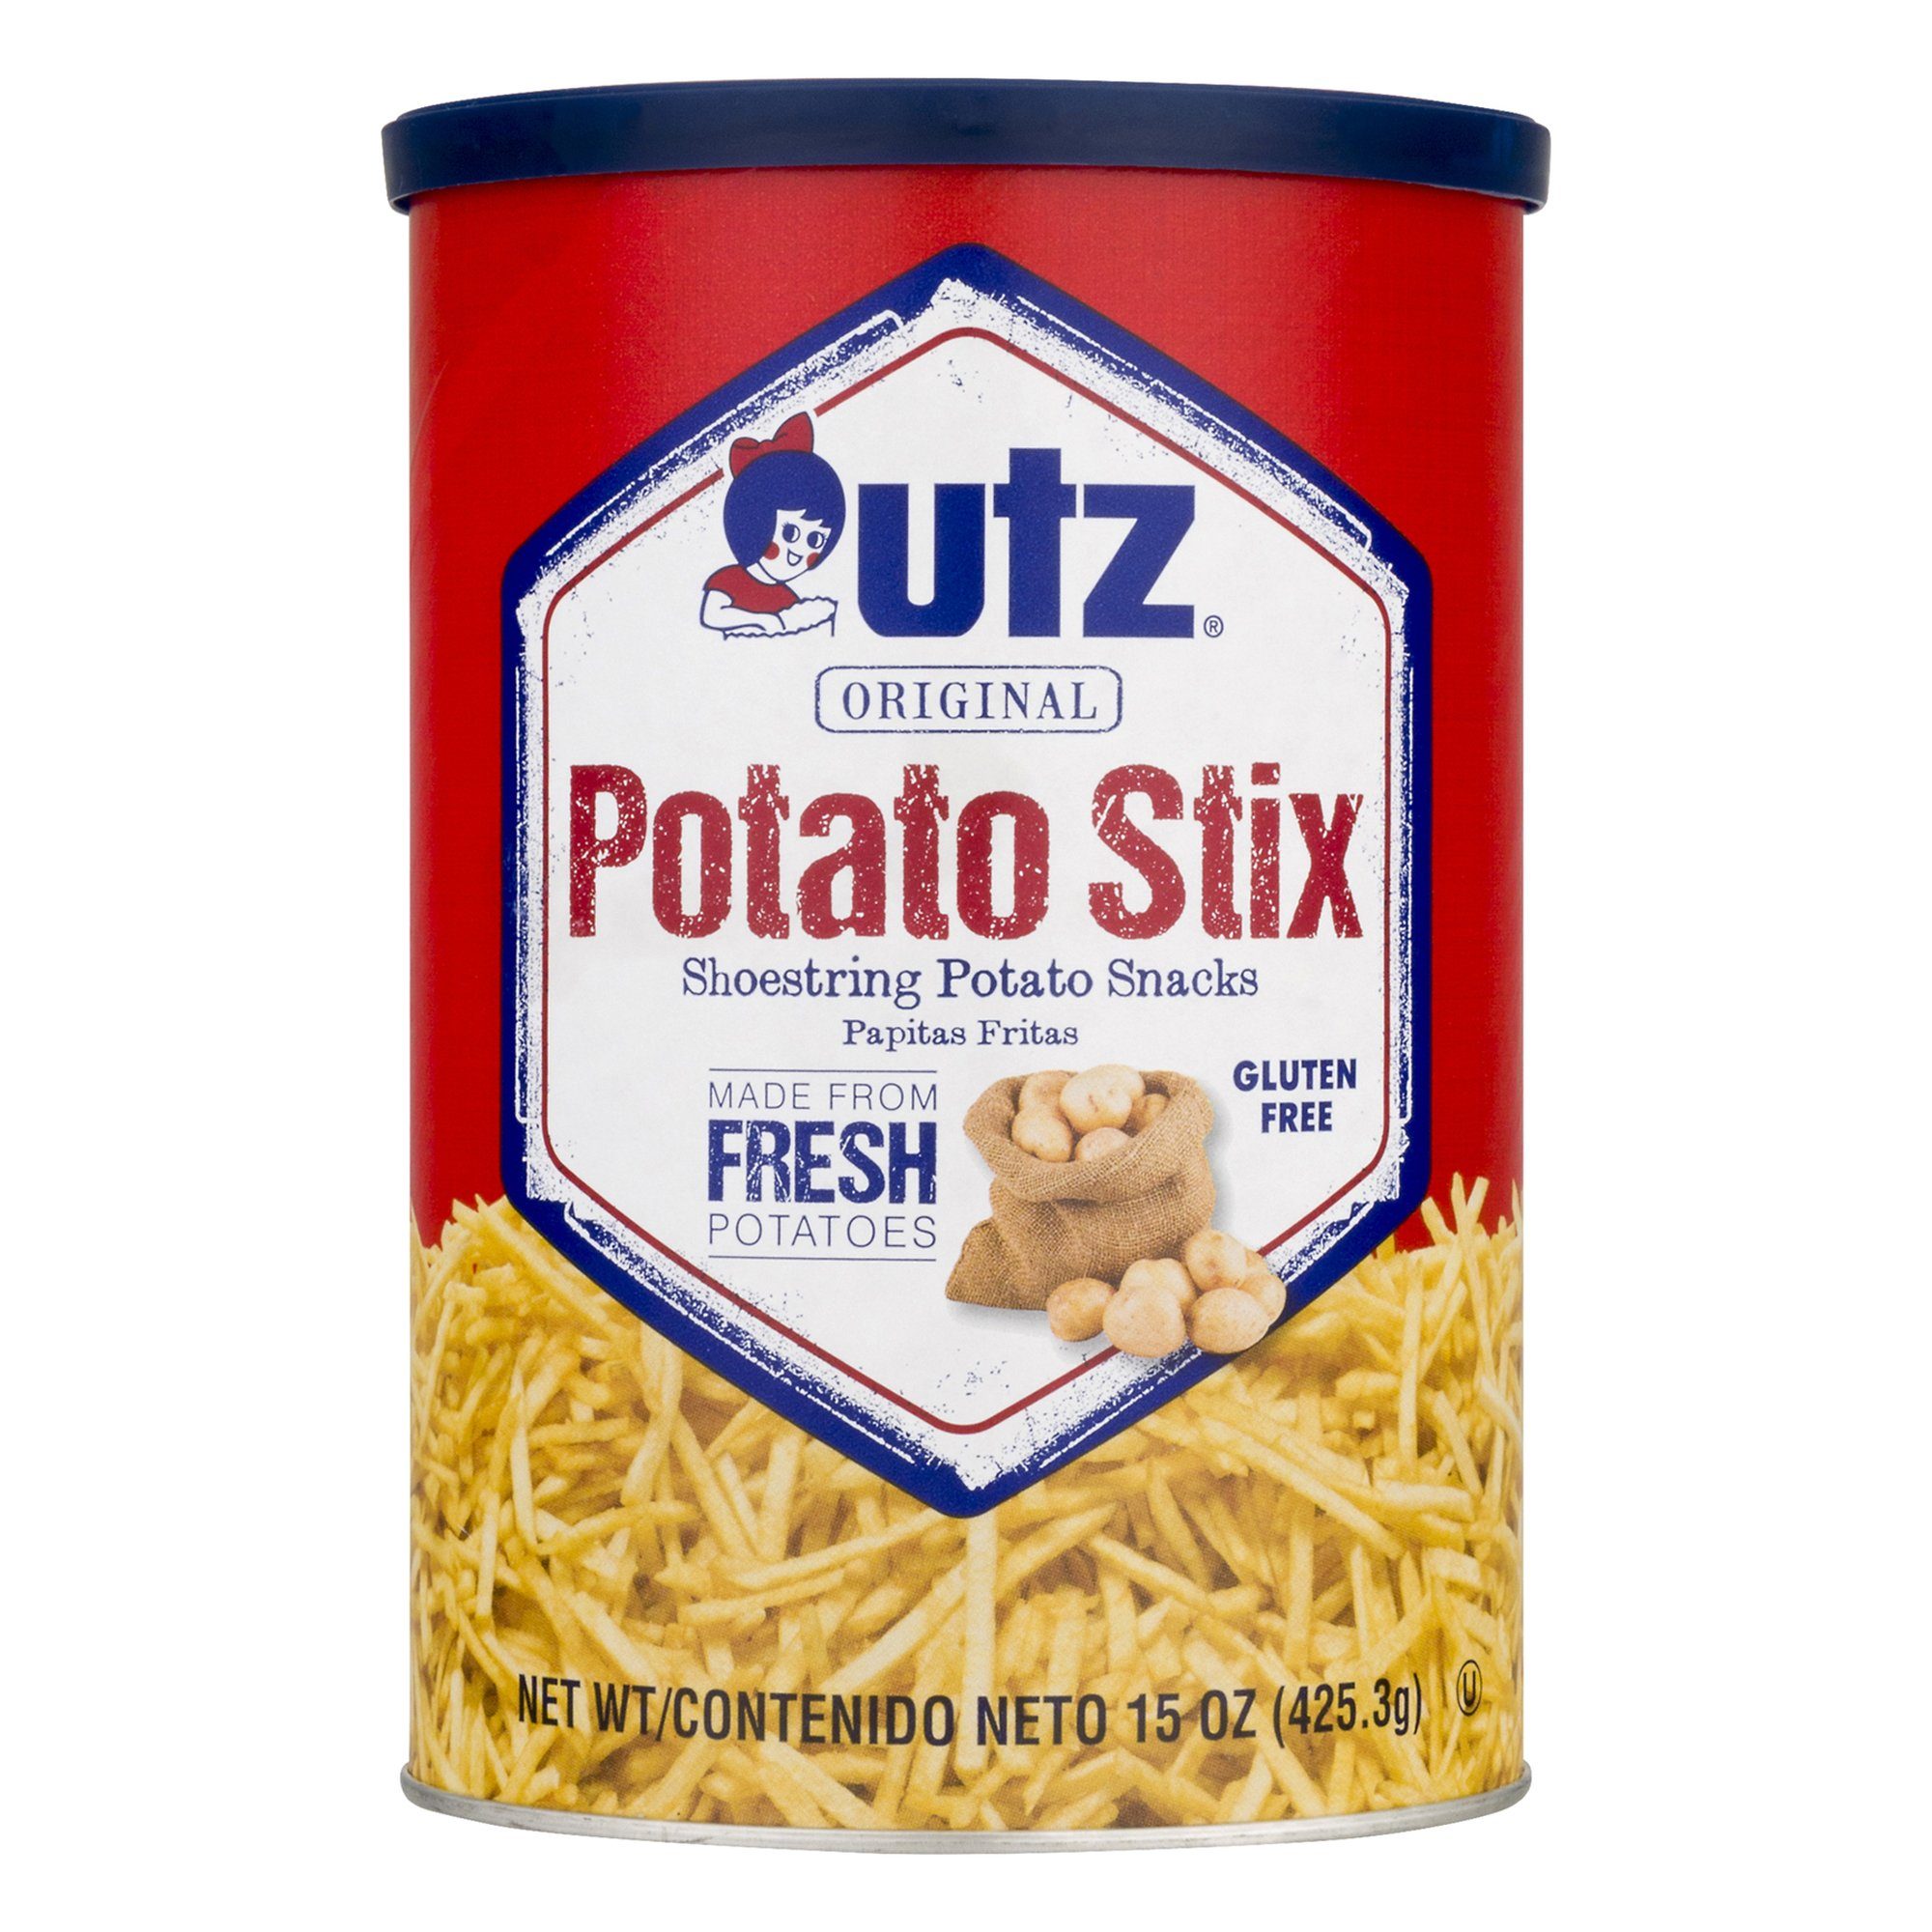 Utz Potato Stix, potato sticks, potato stick, potato stix, Original Potato Sticks Potato Stix Utz 15 oz. - 6 Cannisters 